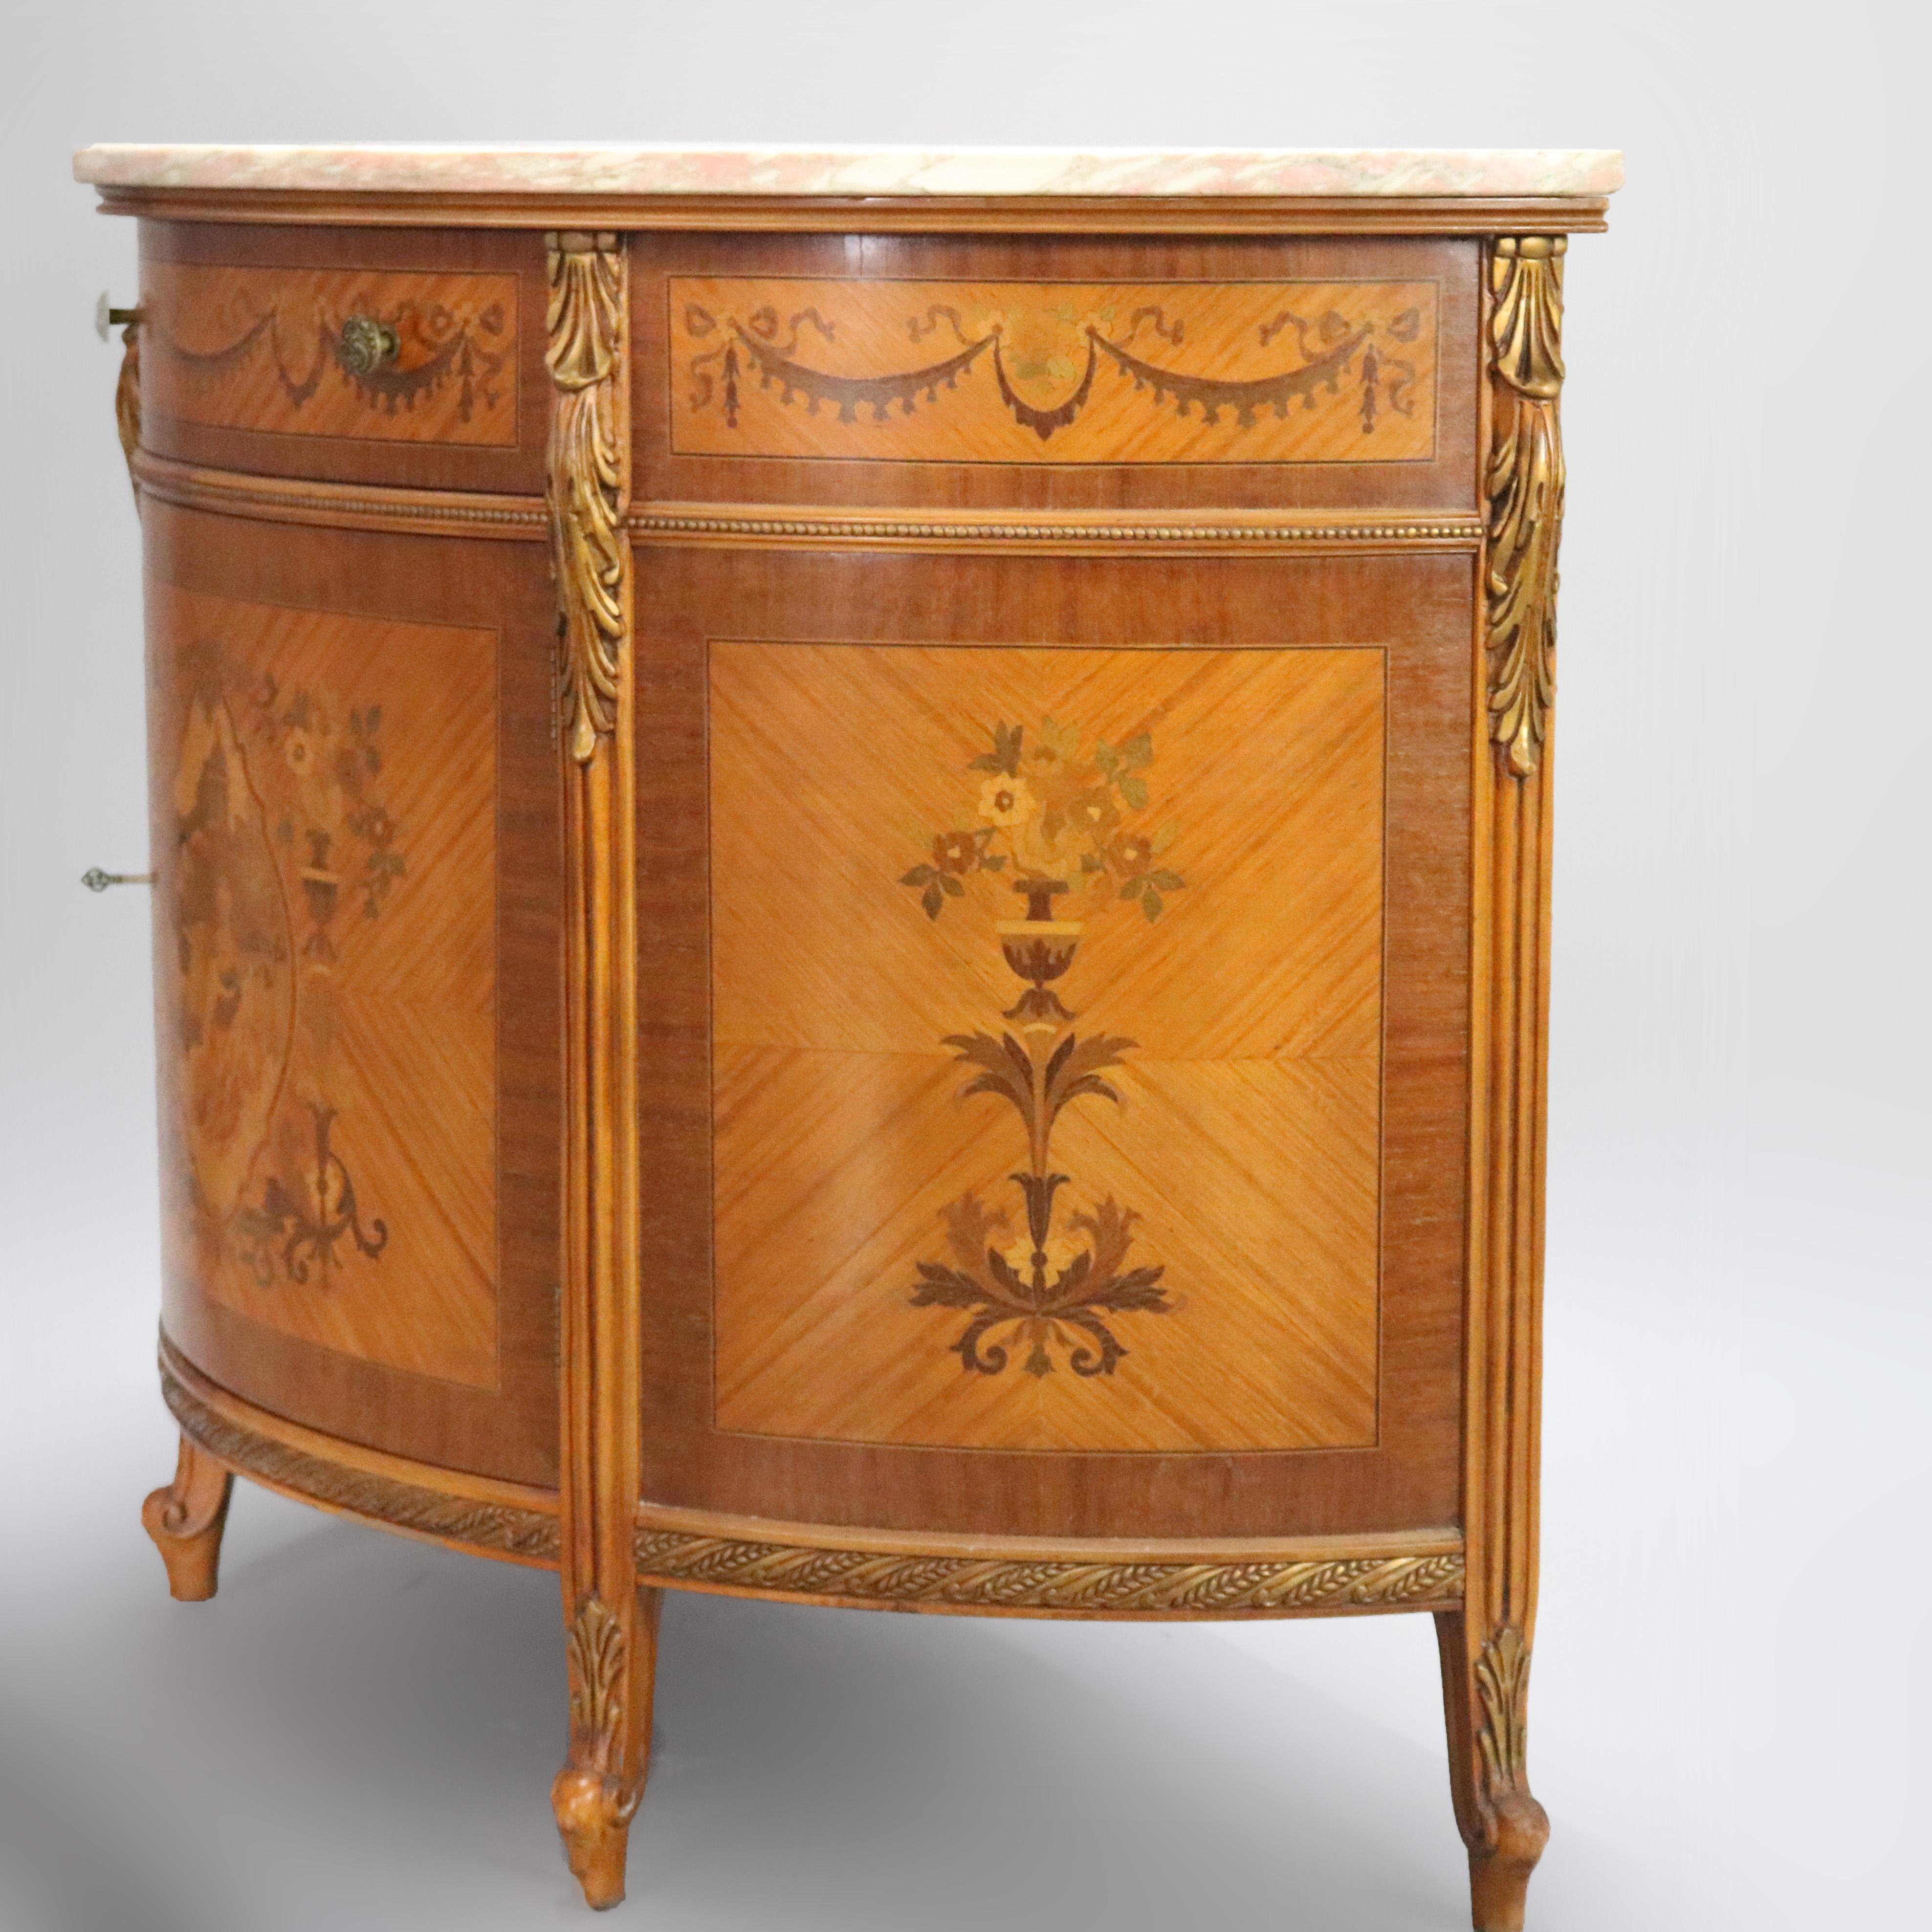 Marble French Louis XVI Mahogany Marquetry Satinwood Inlaid Demilune Credenza